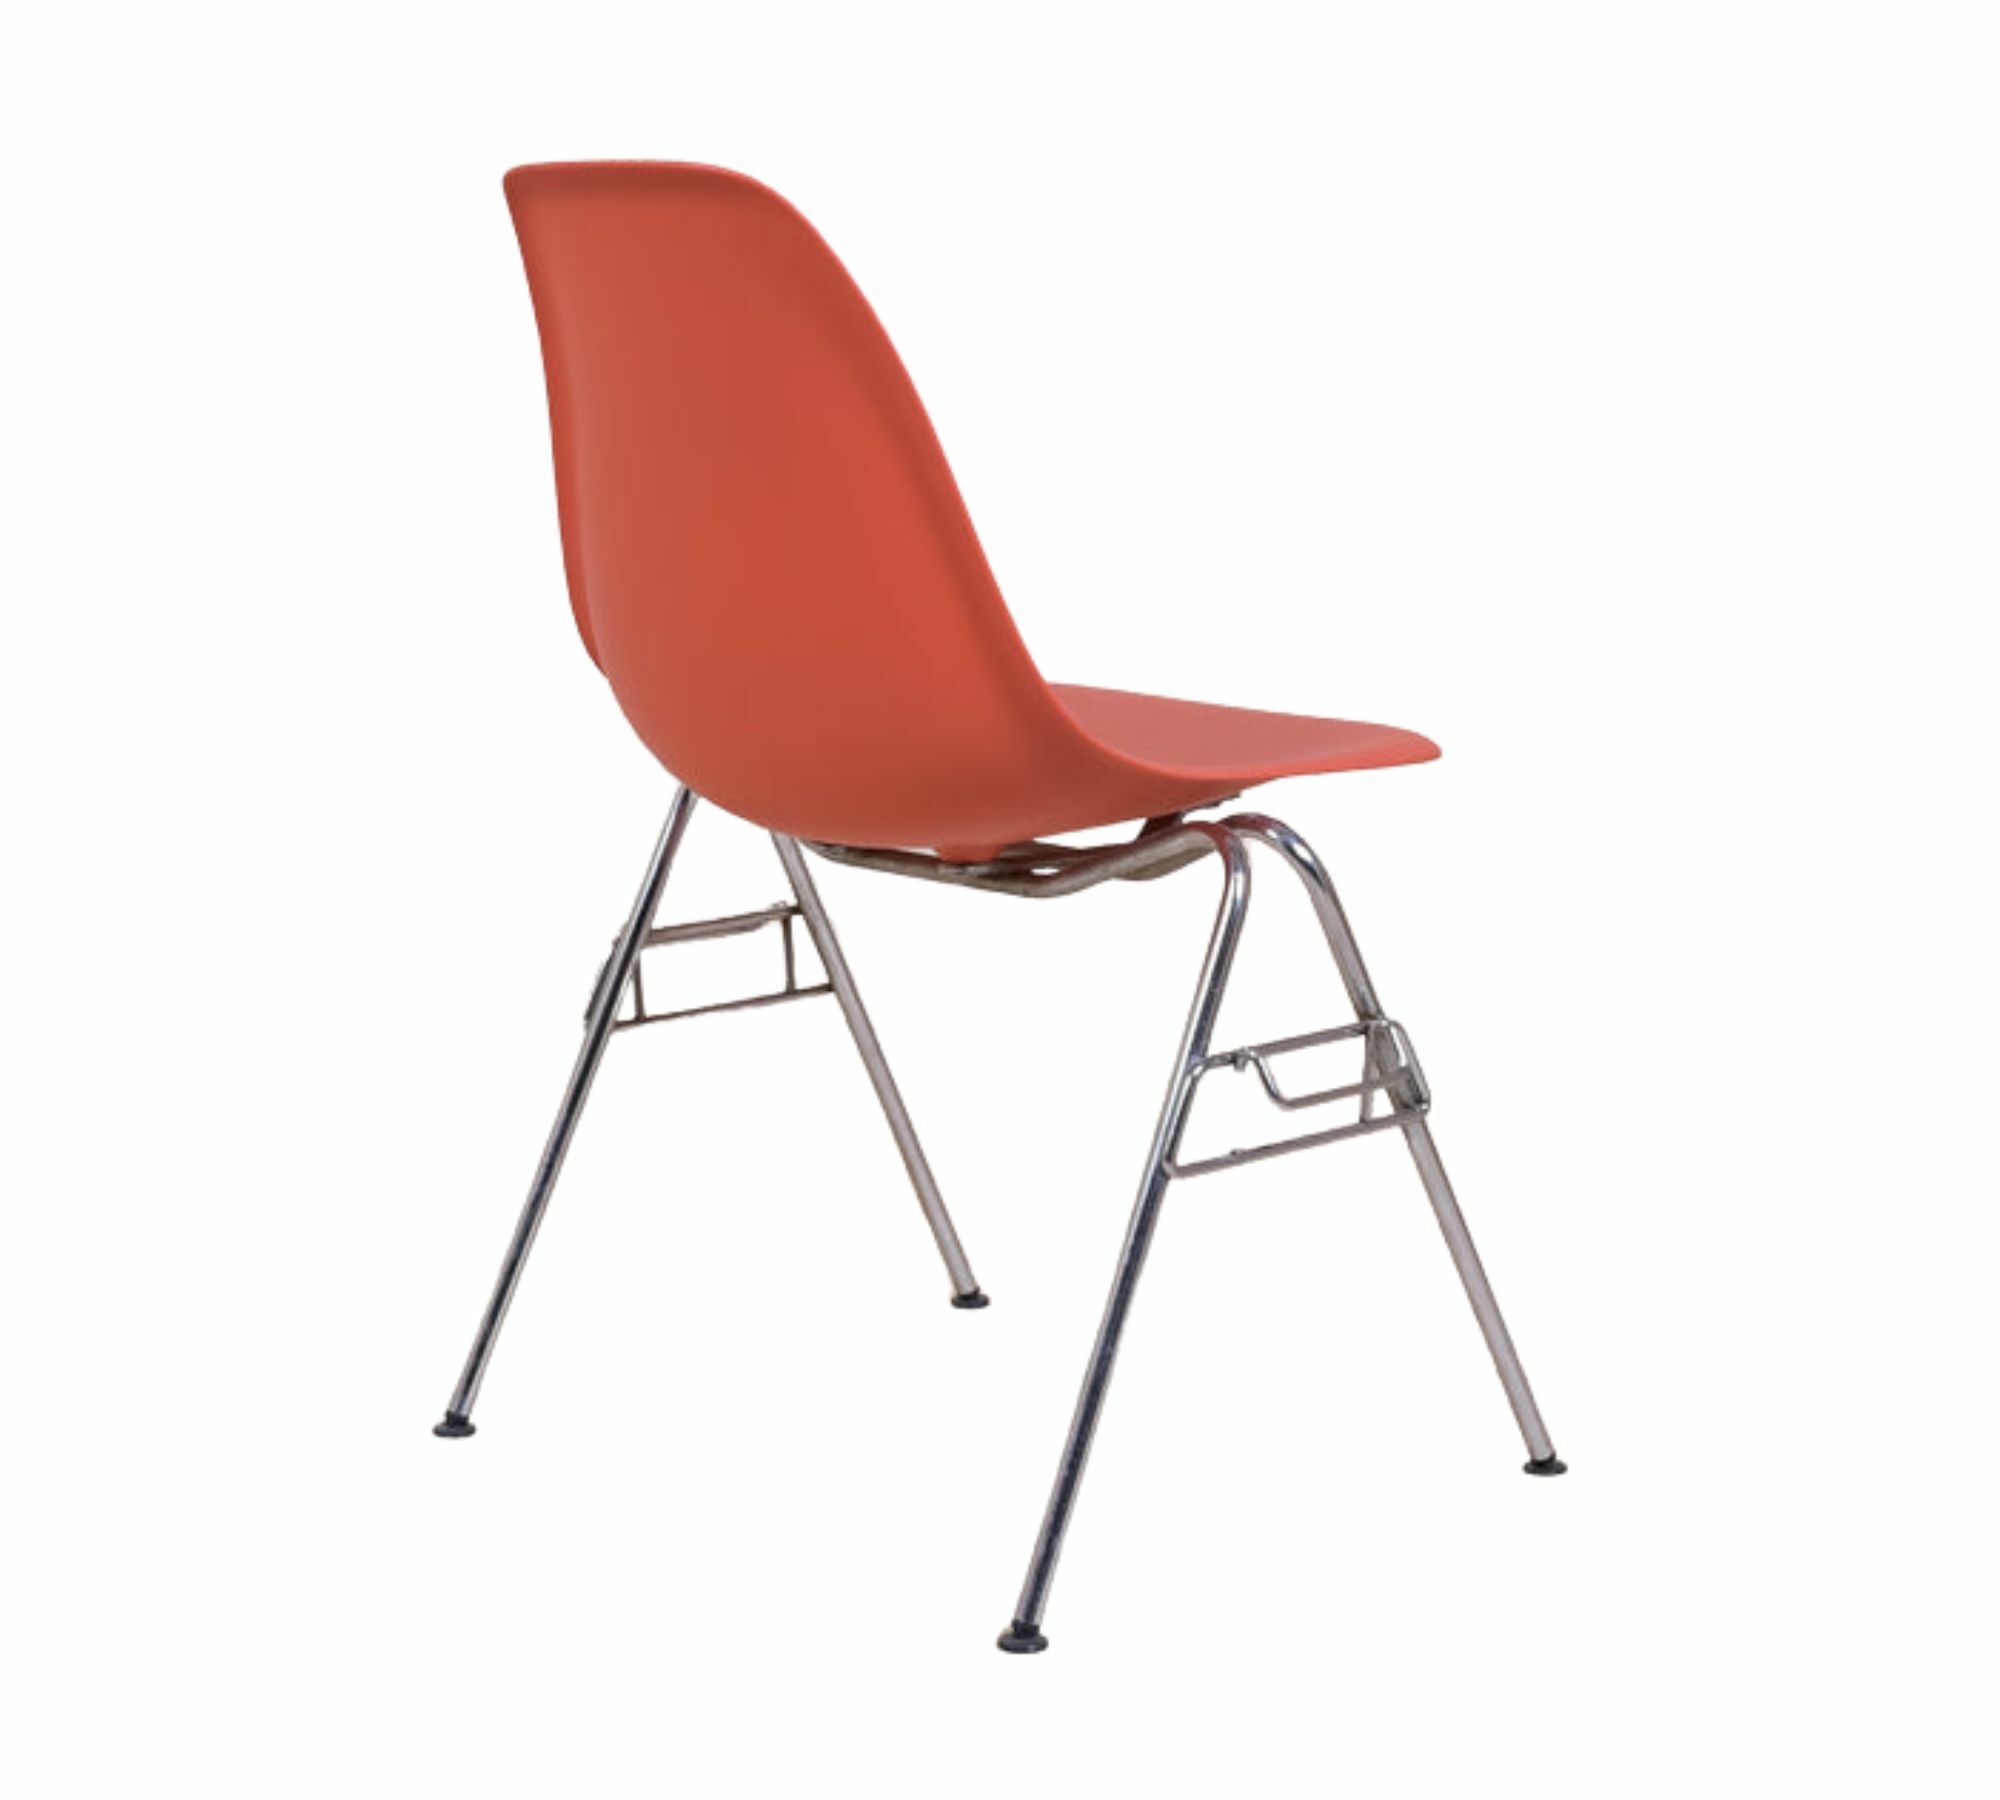 Eames DSS Plastic Side Chair Poppy Red 3